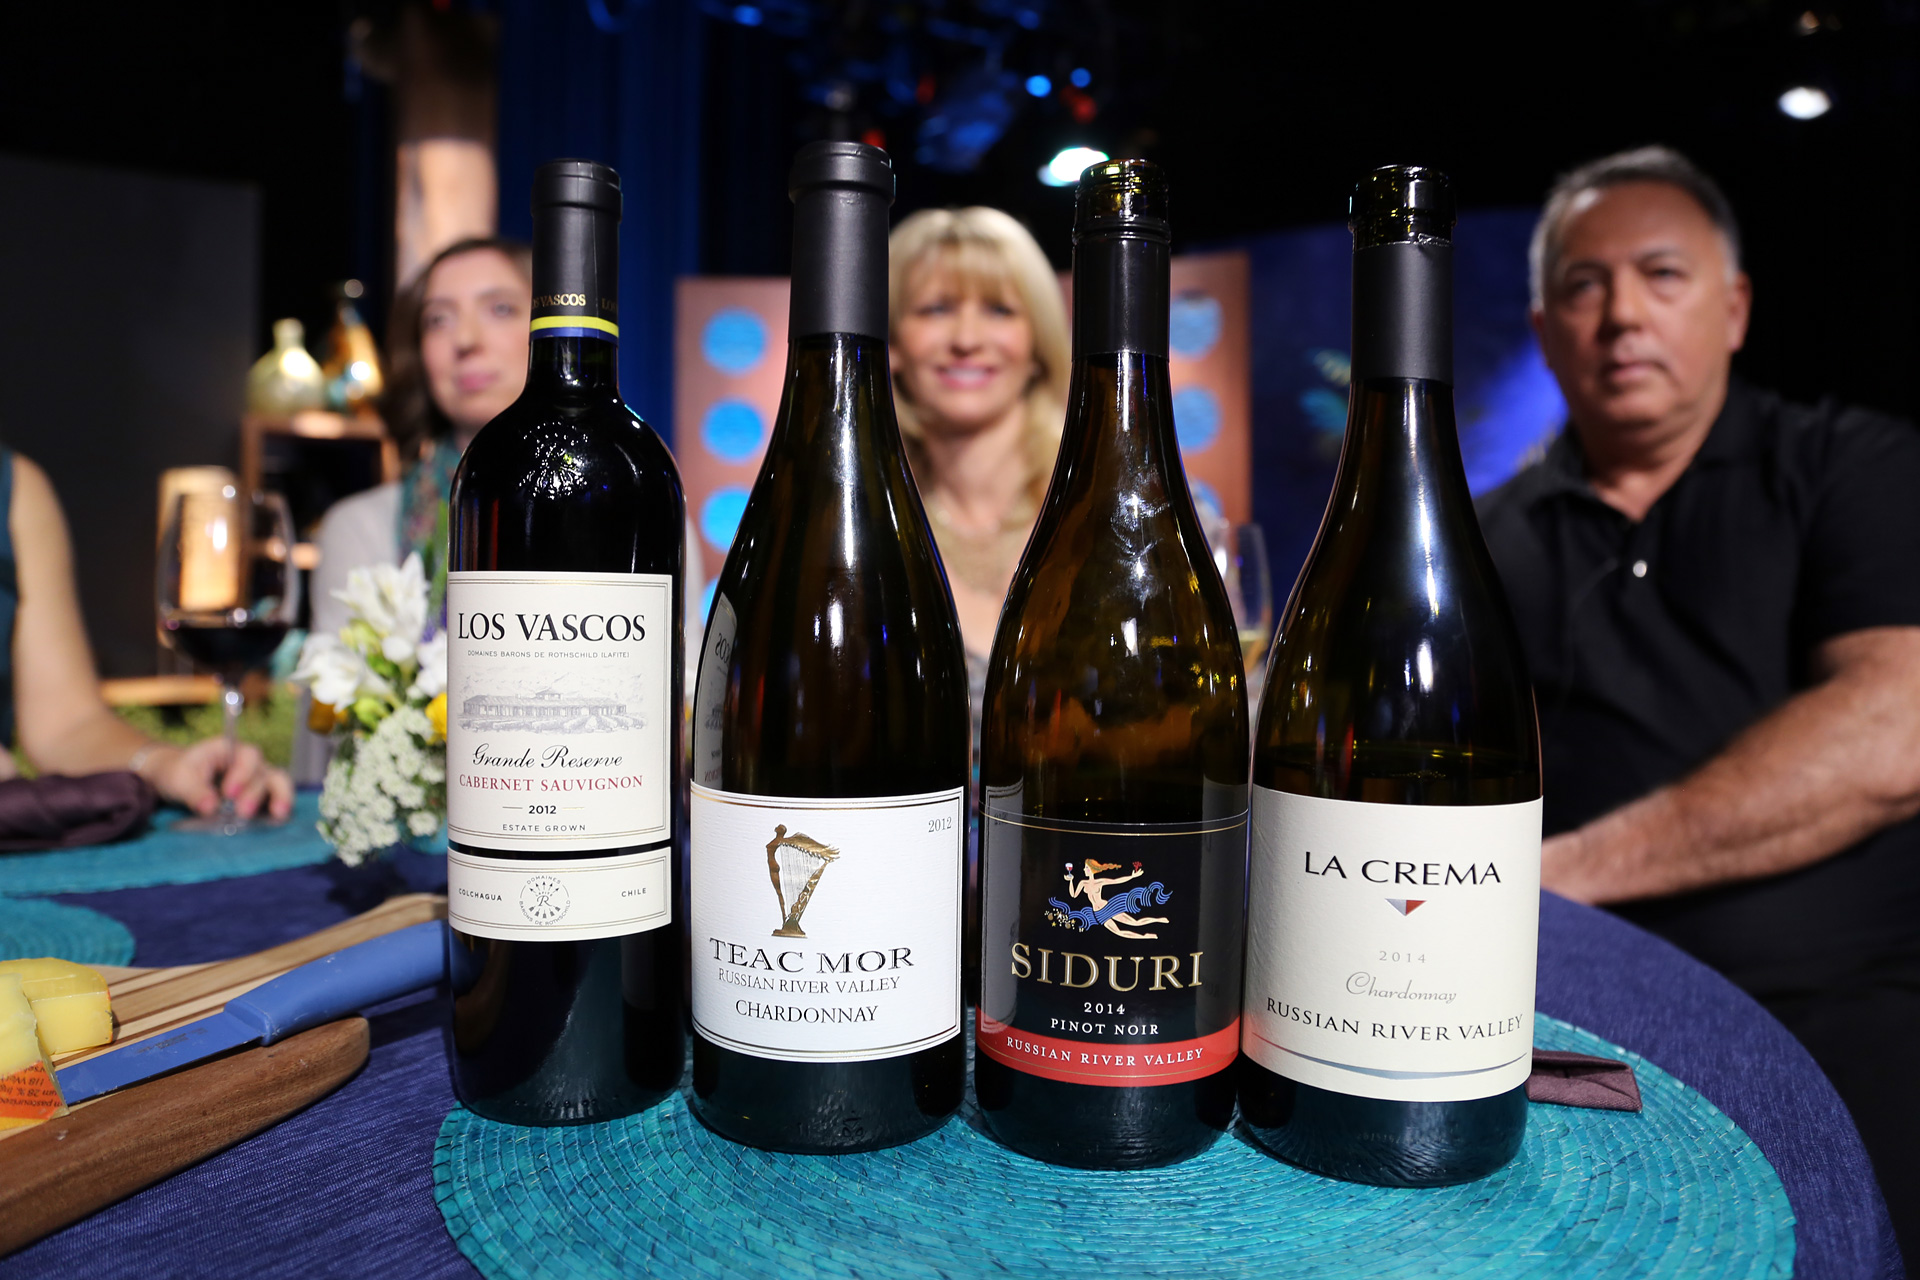 Wines that guests drank on the set of the tenth episode of season 11.